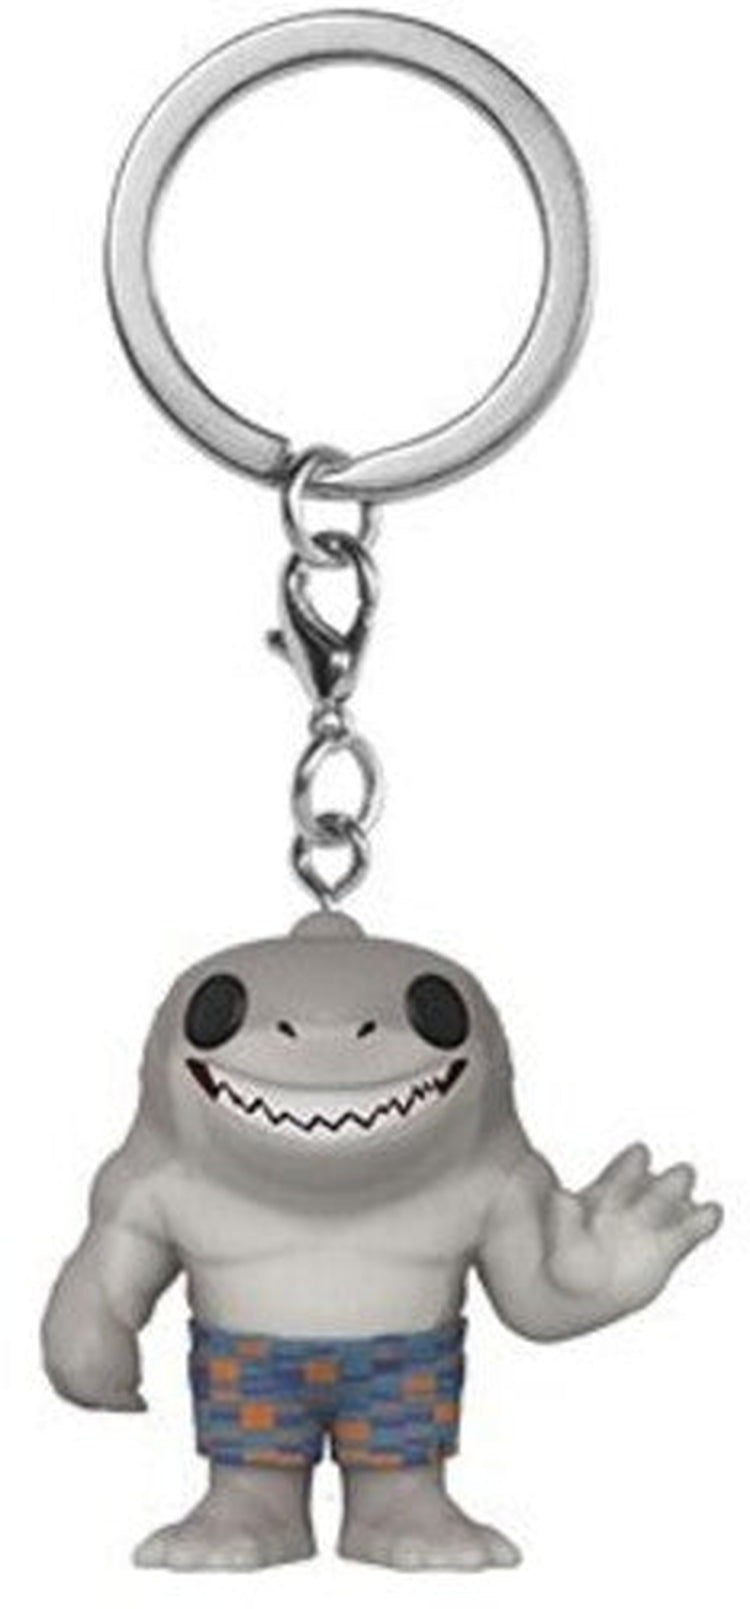 FUNKO POP! KEYCHAIN: The Suicide Squad - King Shark